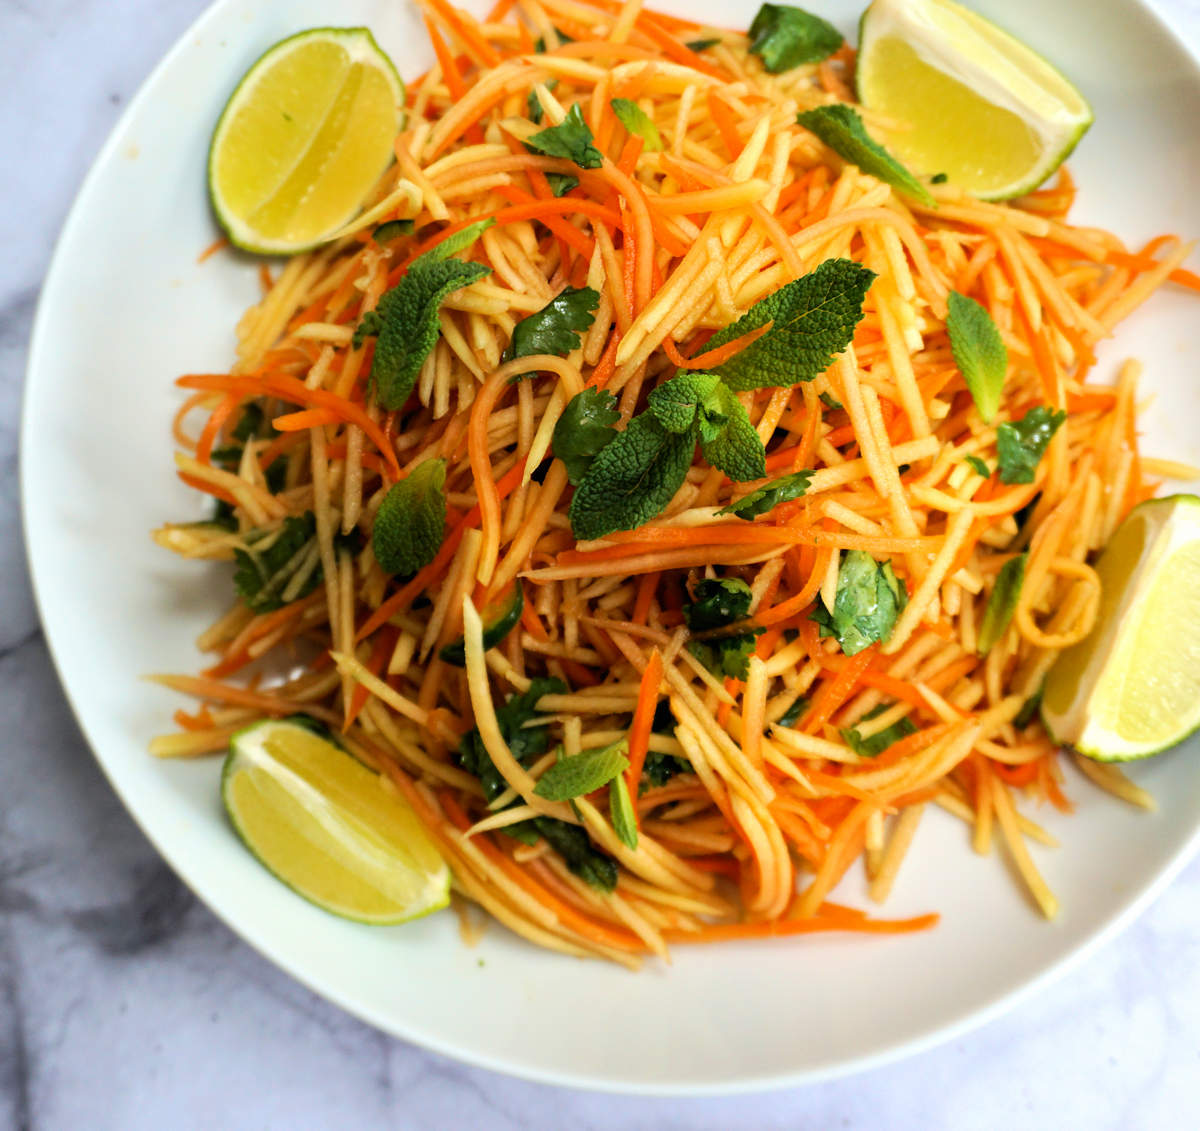 Green papaya salad with fried snapper - Dominica Gourmet